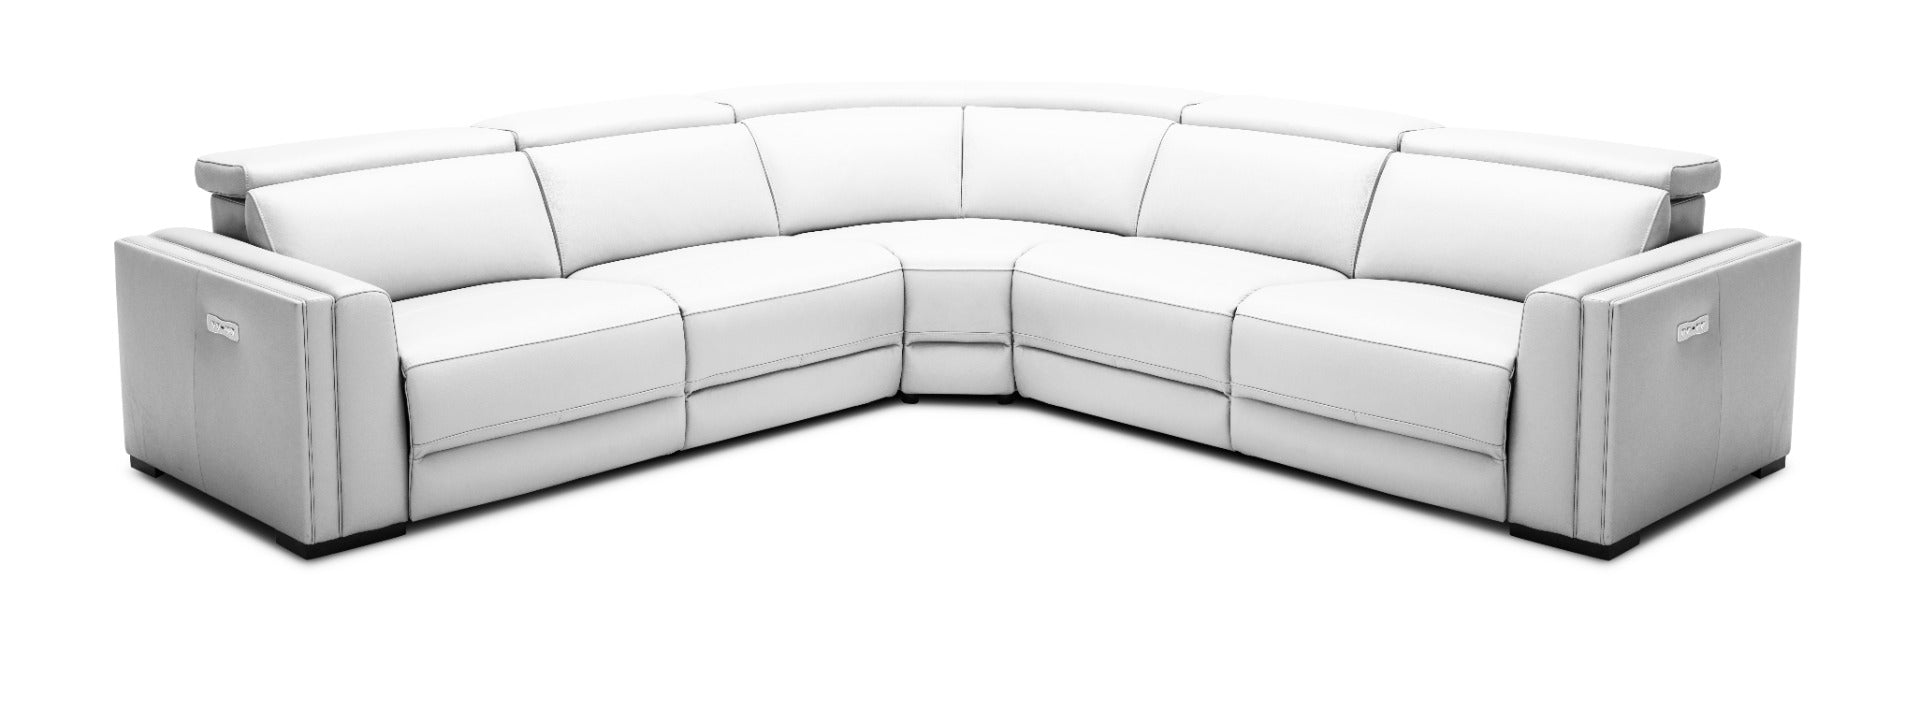 Modrest Frazier - Modern Leather Sectional Sofa with Recliners-Sectional Sofa-VIG-Wall2Wall Furnishings